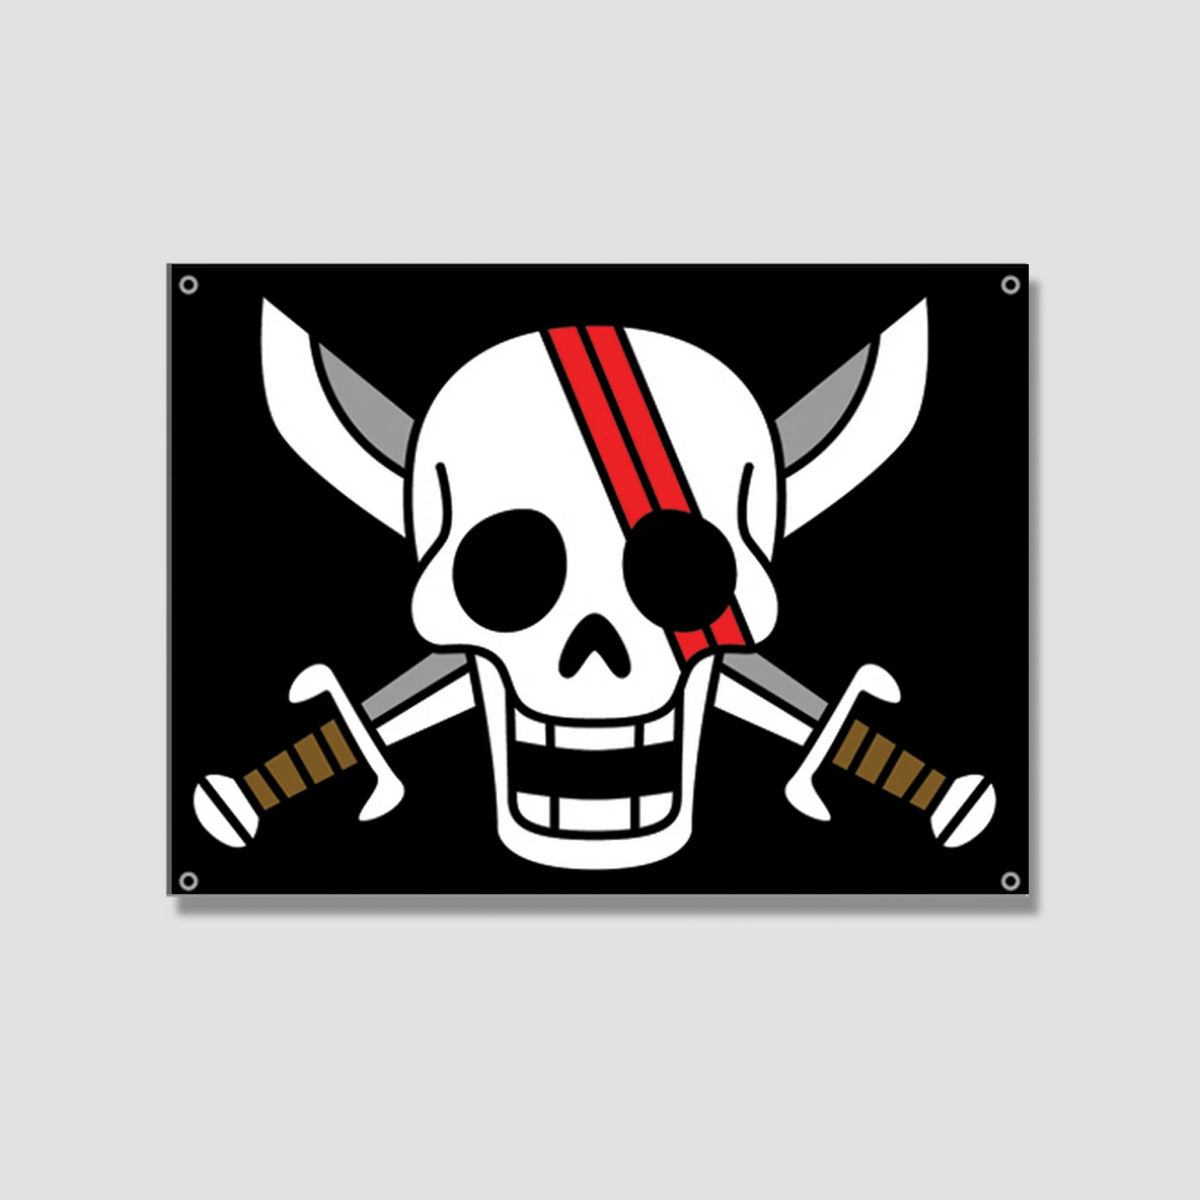 The pirate flag & the jolly roger